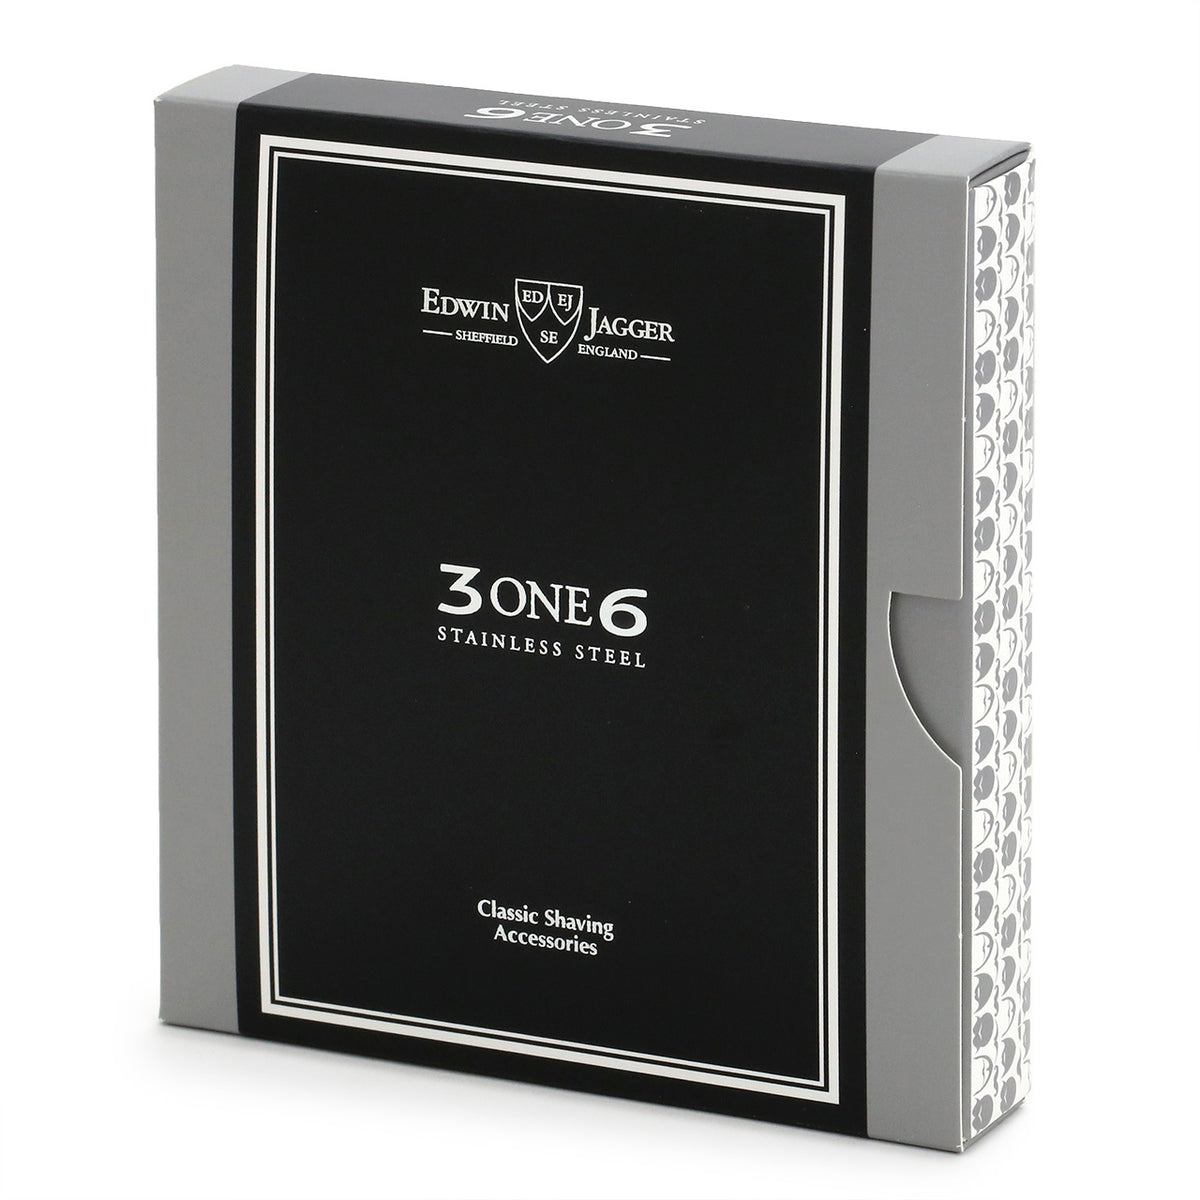 Edwin Jagger 3ONE6 Stainless Steel Safety Razor packaging